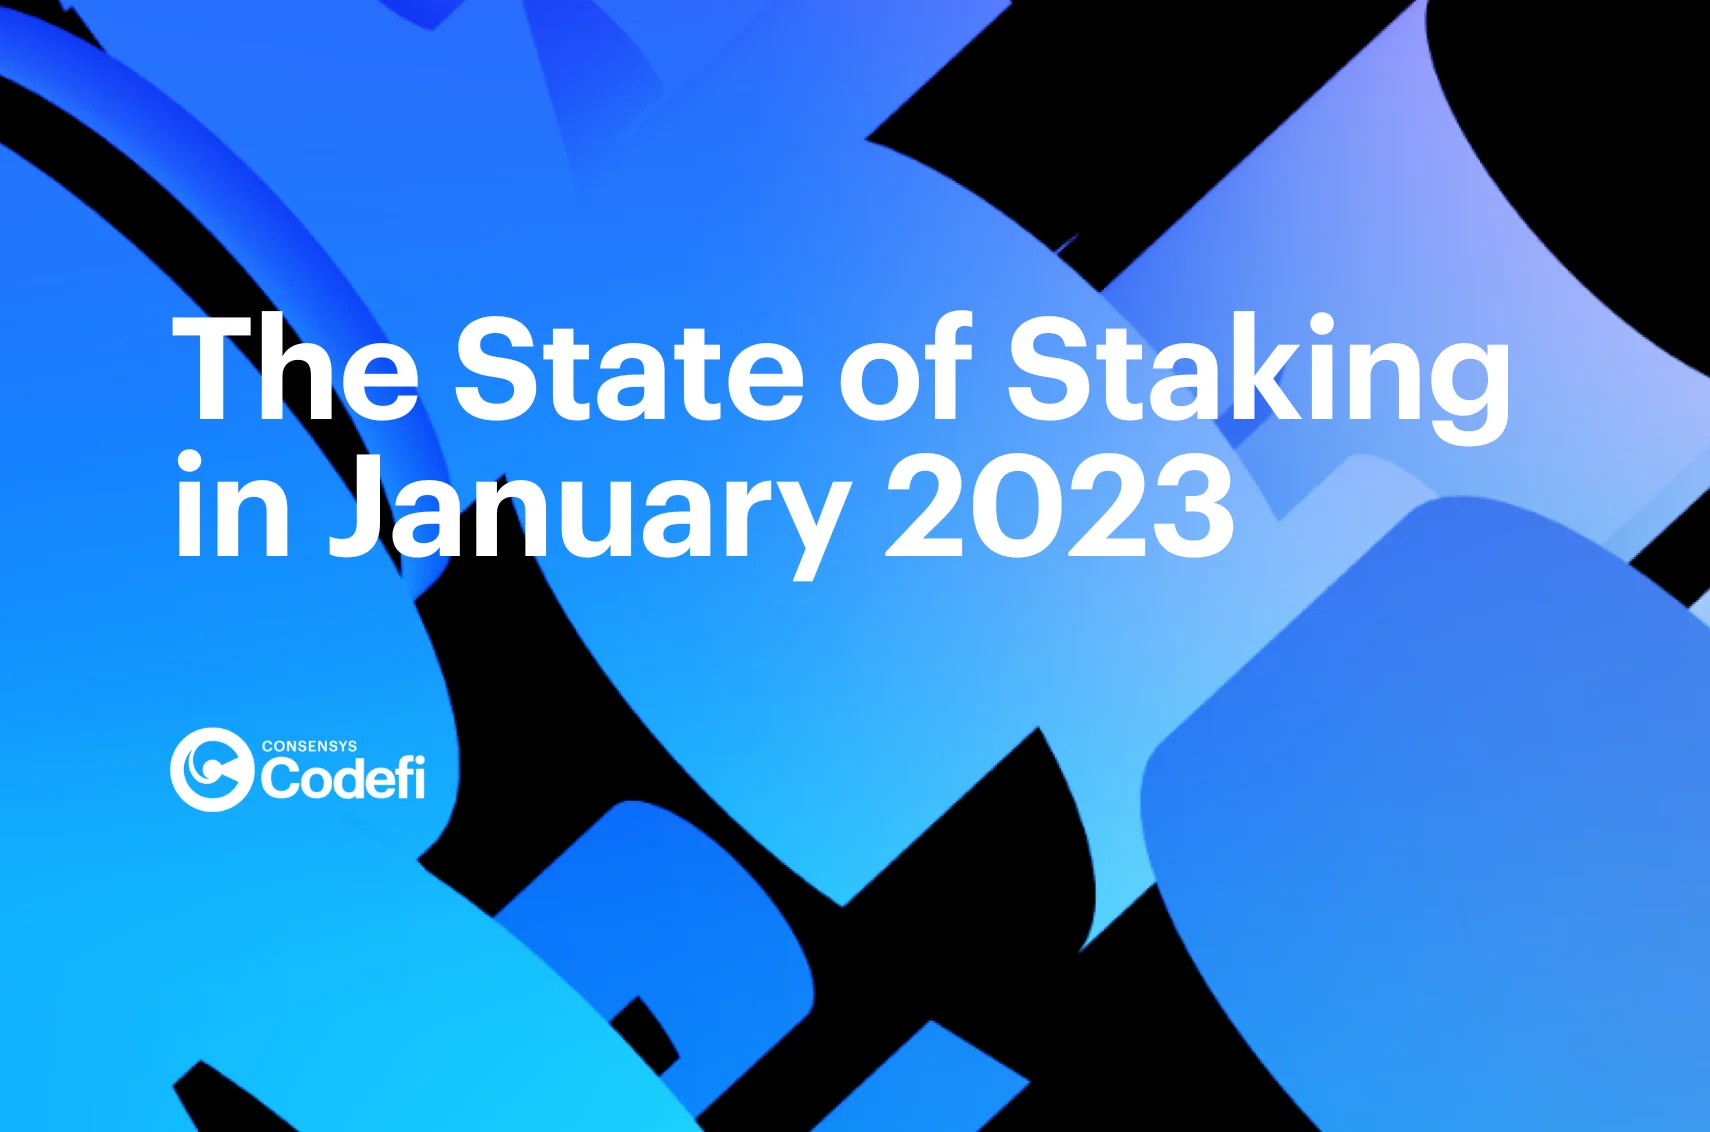 Image: The State of Staking in January 2023